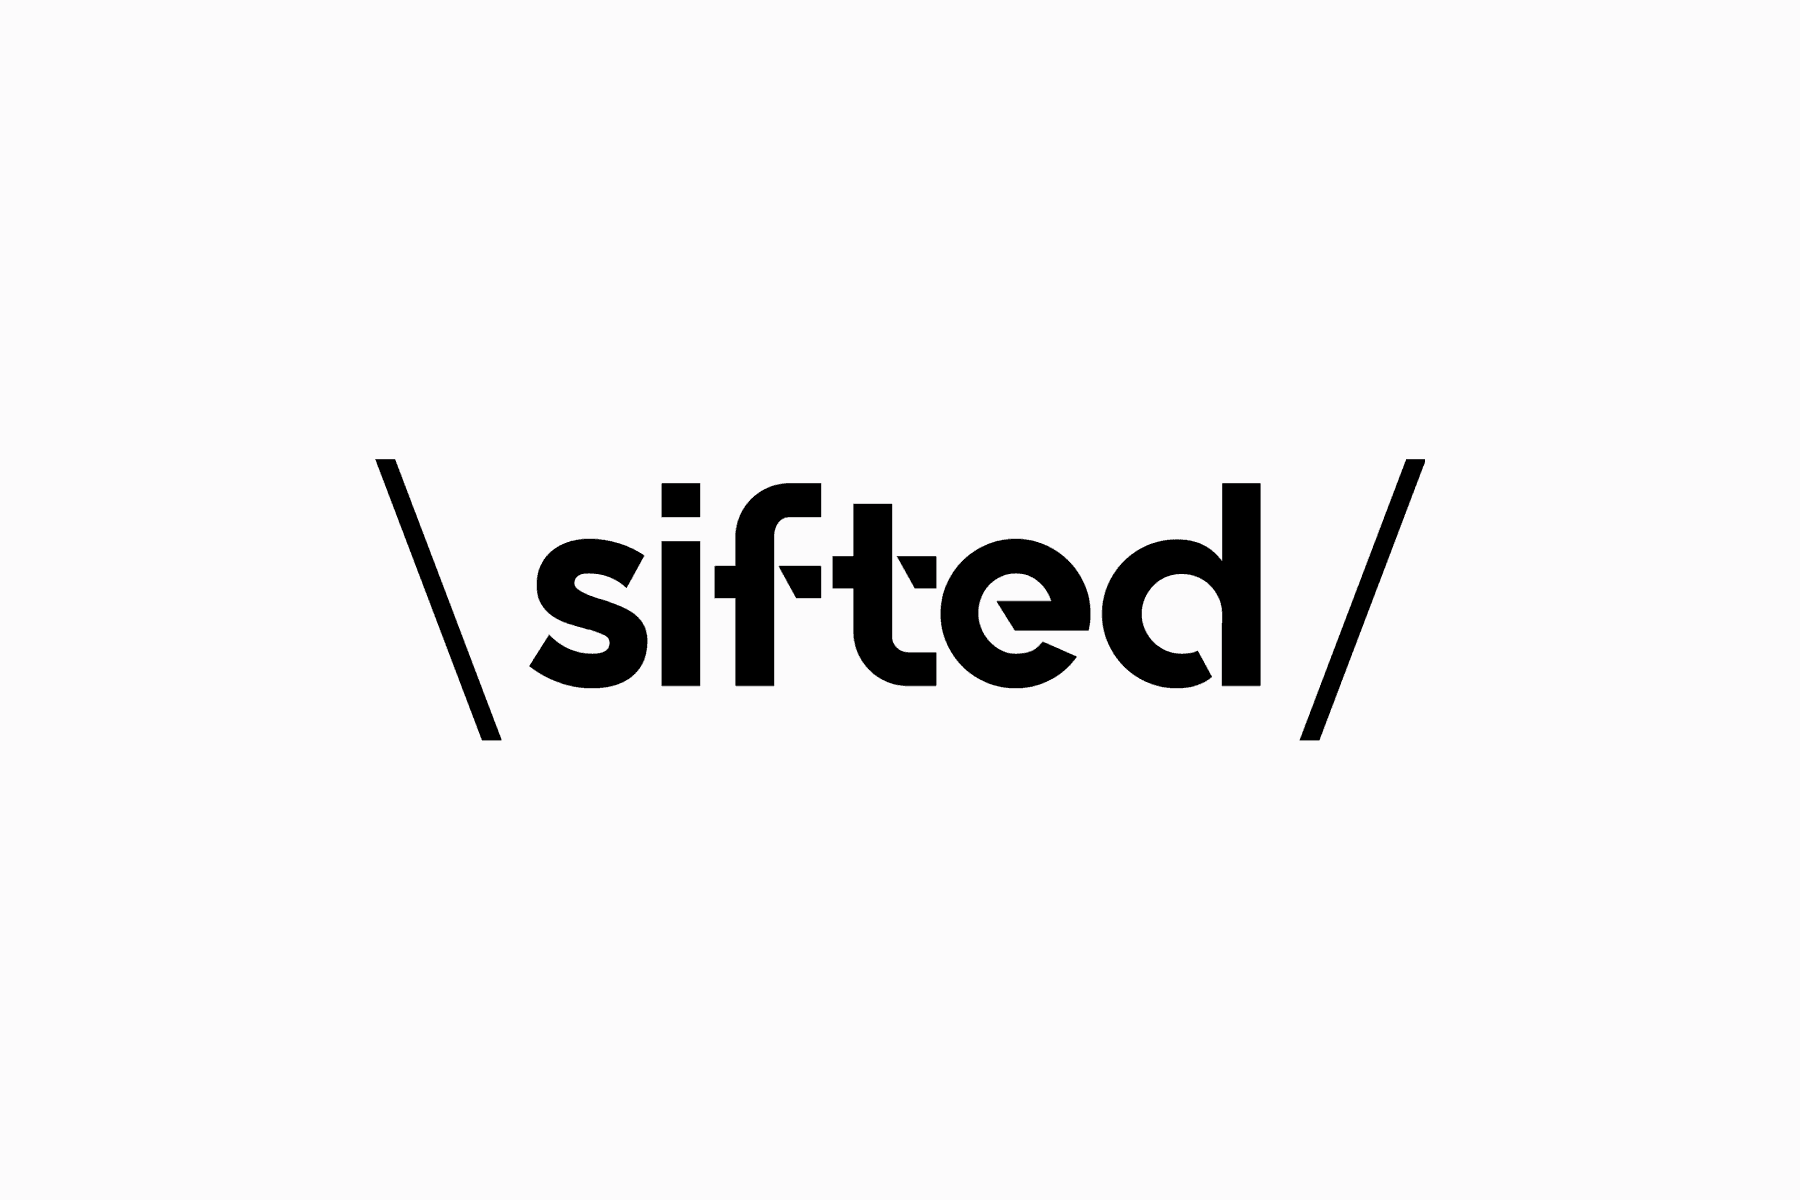 Sifted logo.